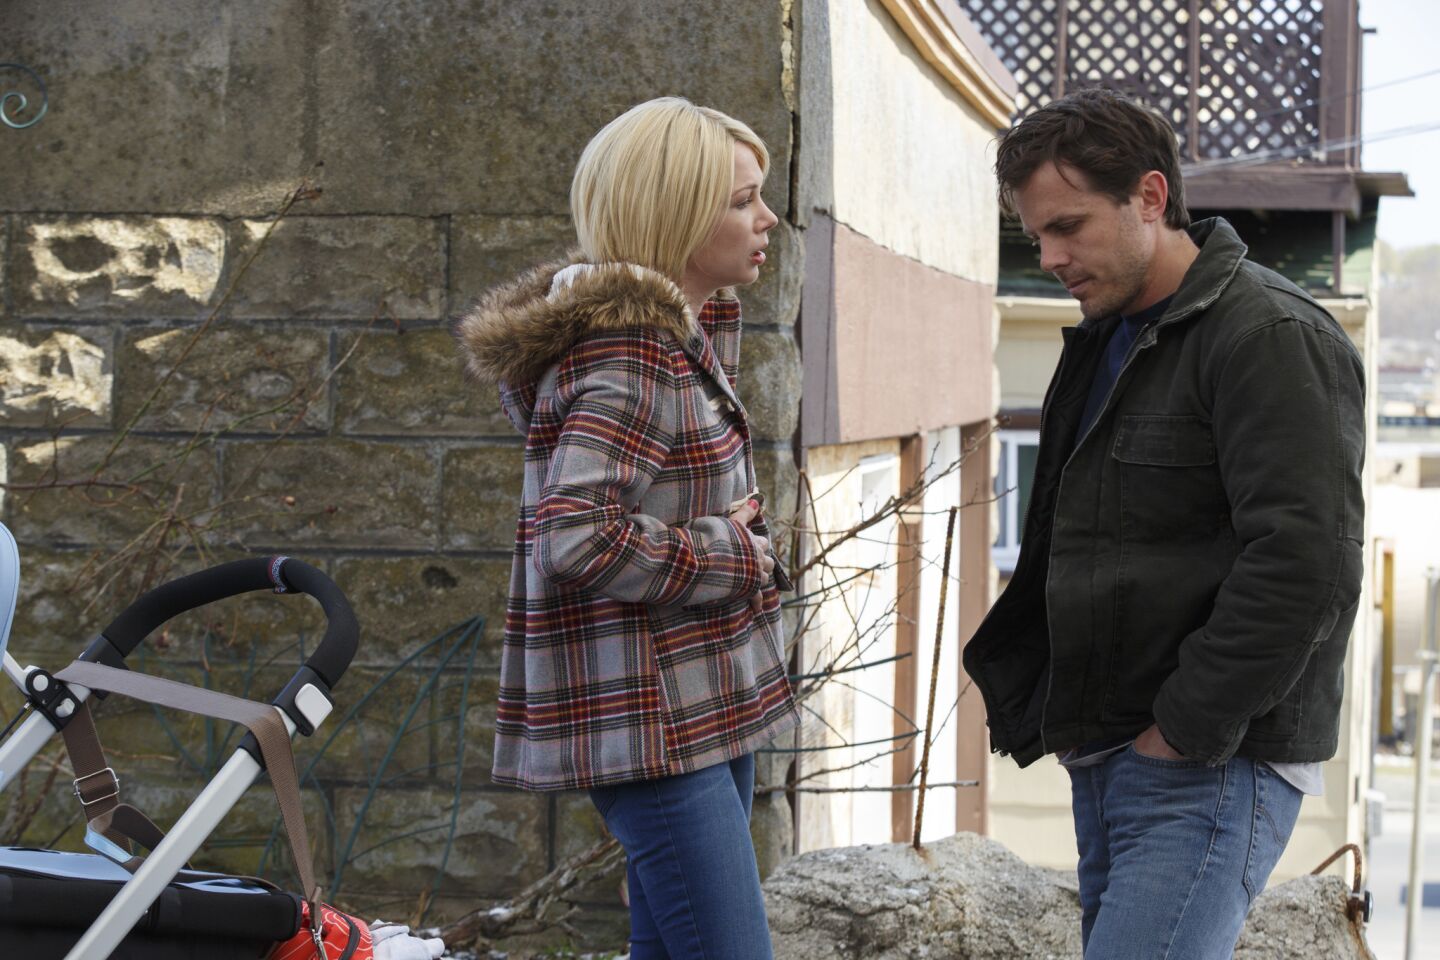 NOMINATED: Cast in a motion picture; male actor in a leading role — Casey Affleck (right); female actor in a supporting role — Michelle Williams (left); male actor in a supporting role — Lucas Hedges.